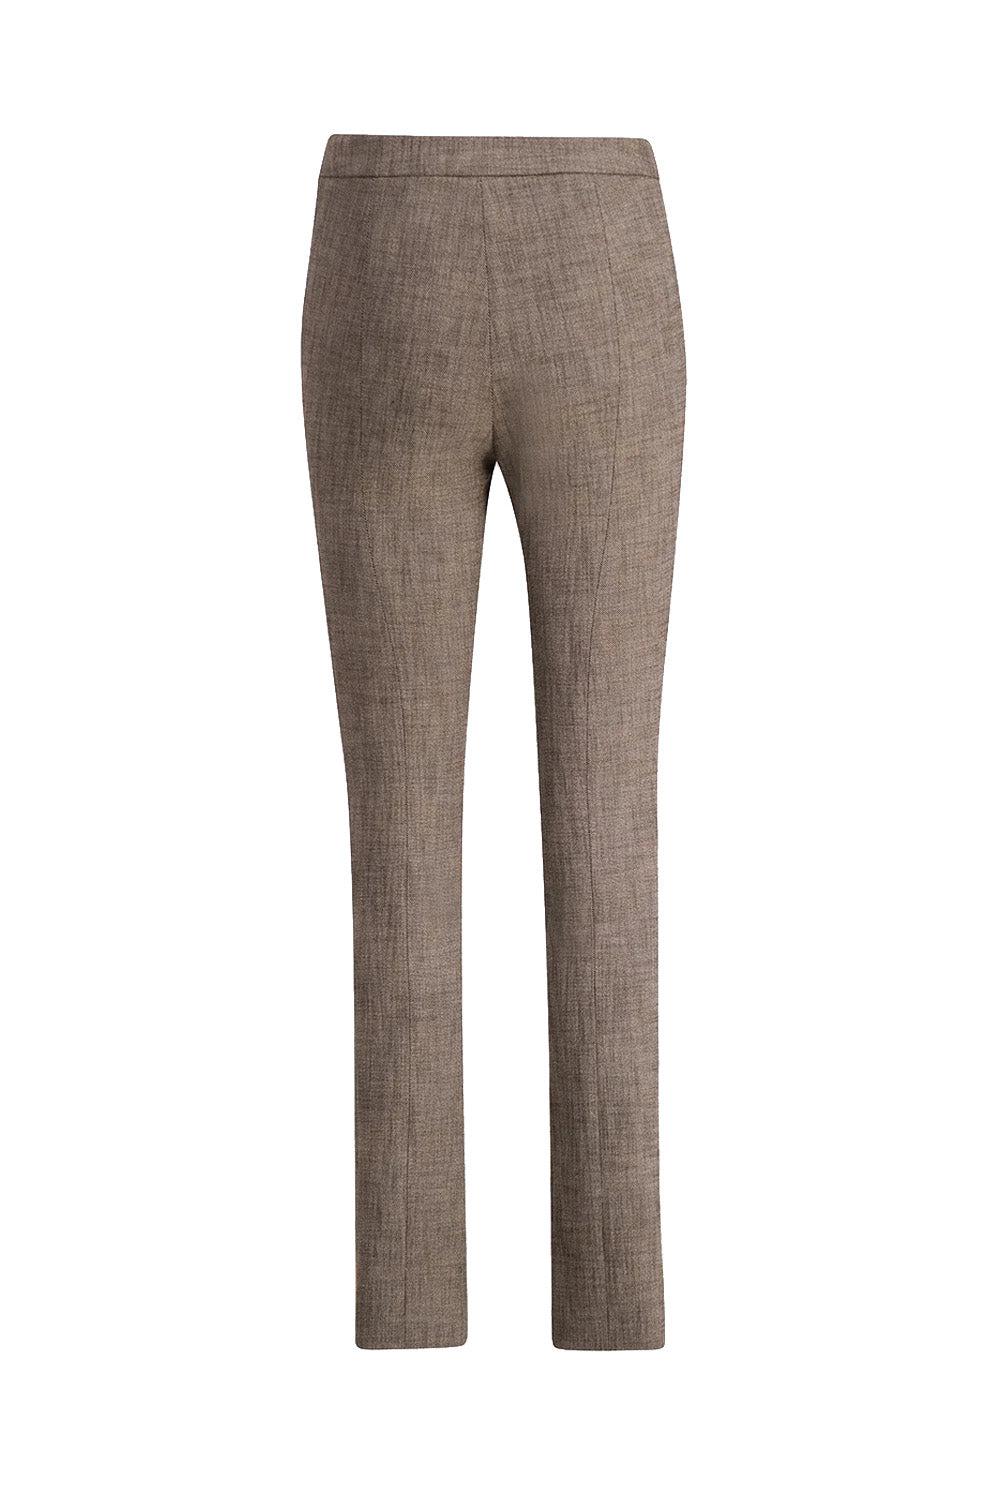 Sira-Piping-Trouser-Taupe-2